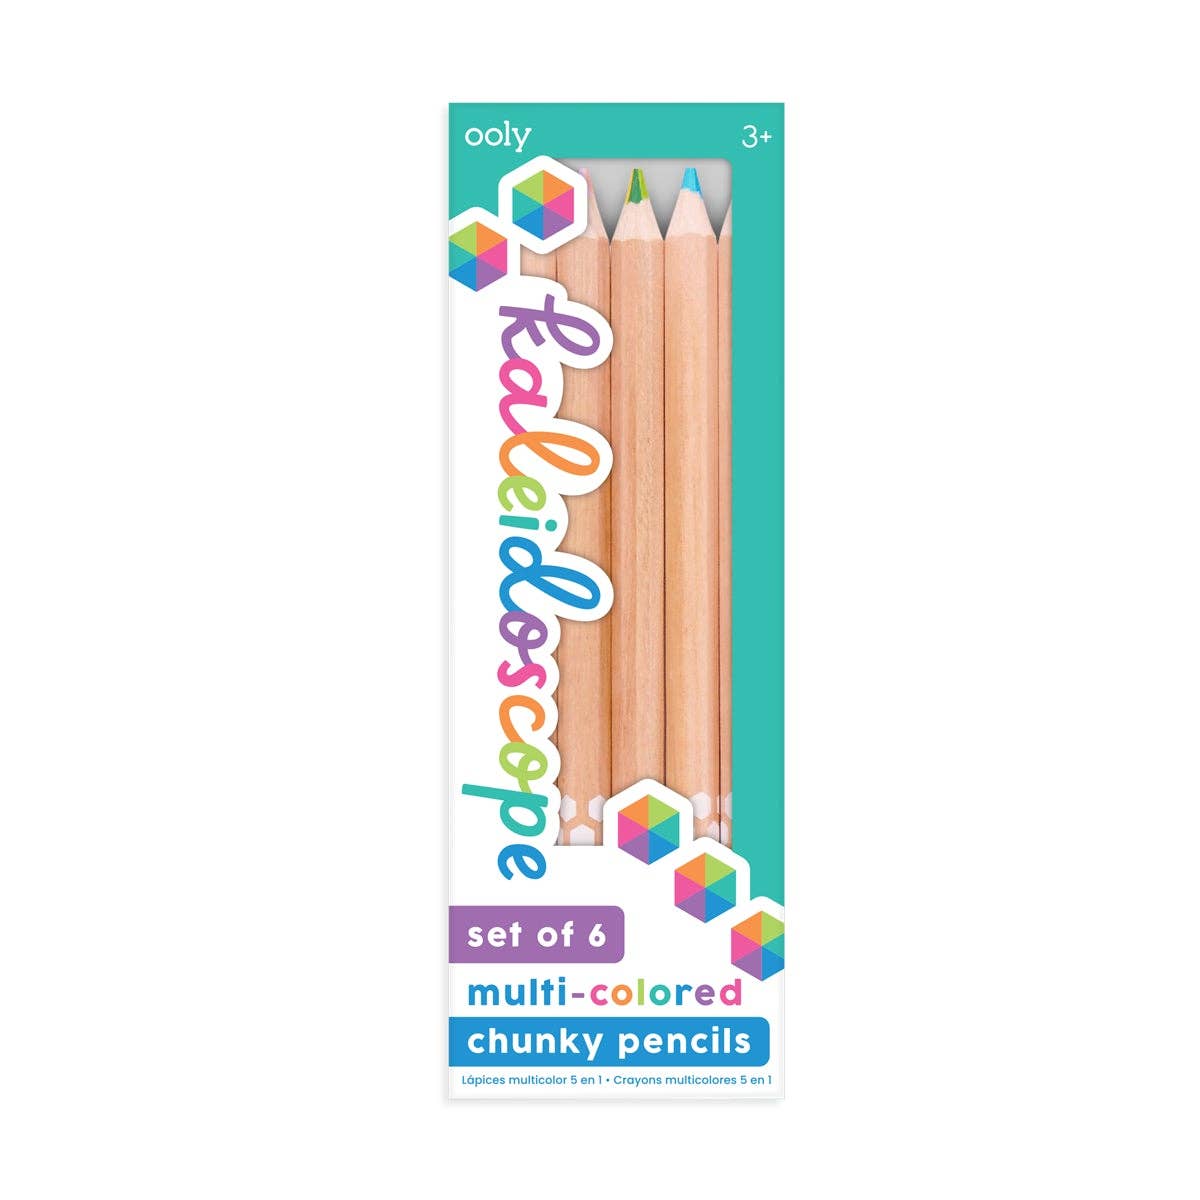 Ooly Jumbo Brights Neon Colored Pencil Set of 6